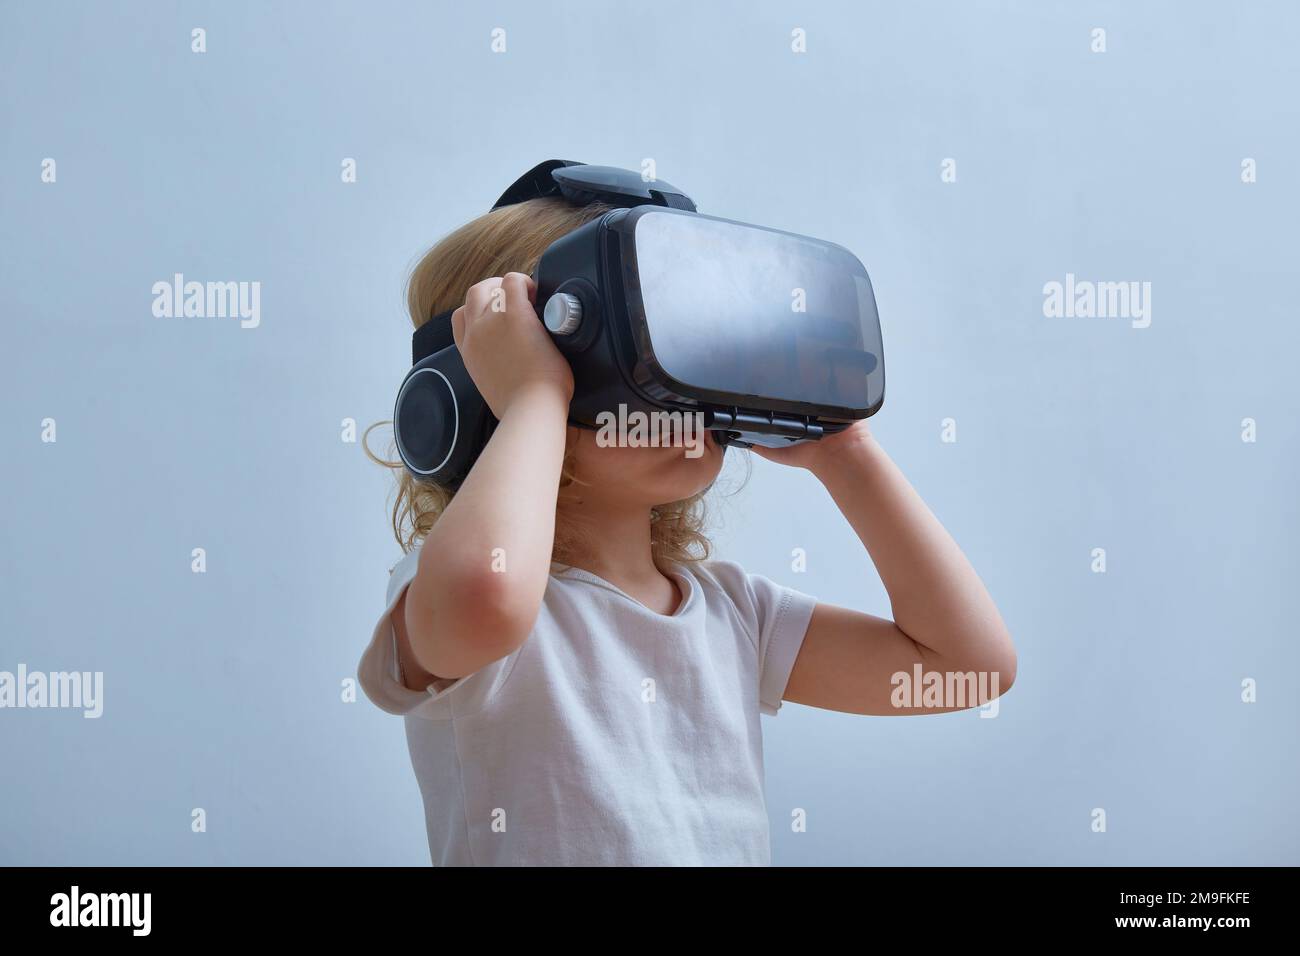 Child with virtual reality headset. Innovation technology and education concept. Copy space. Stock Photo